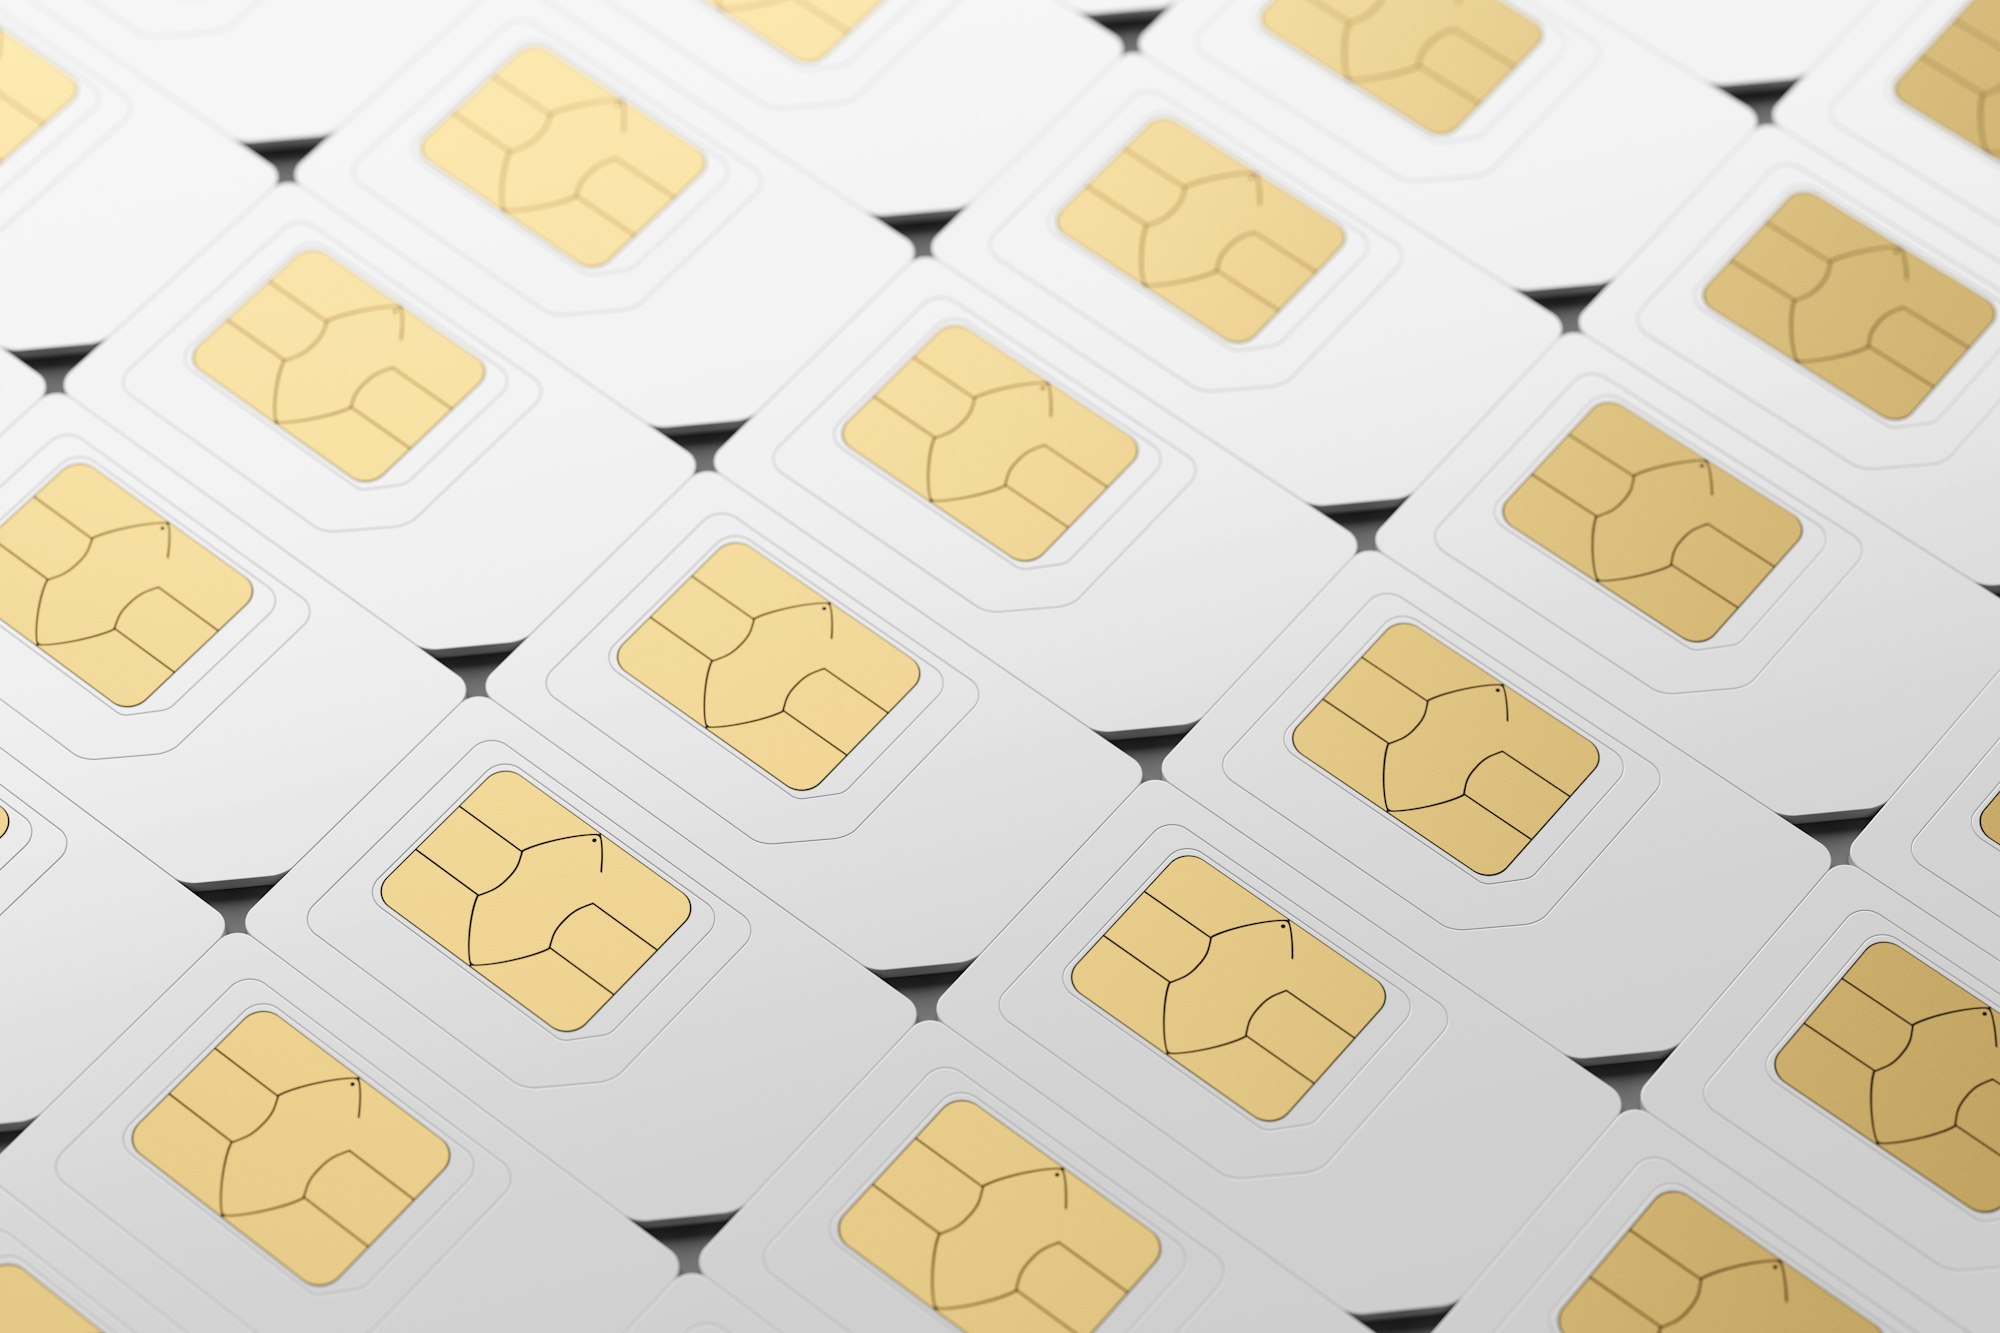 SIM cards arranged in a row. 3D rendering illustration.